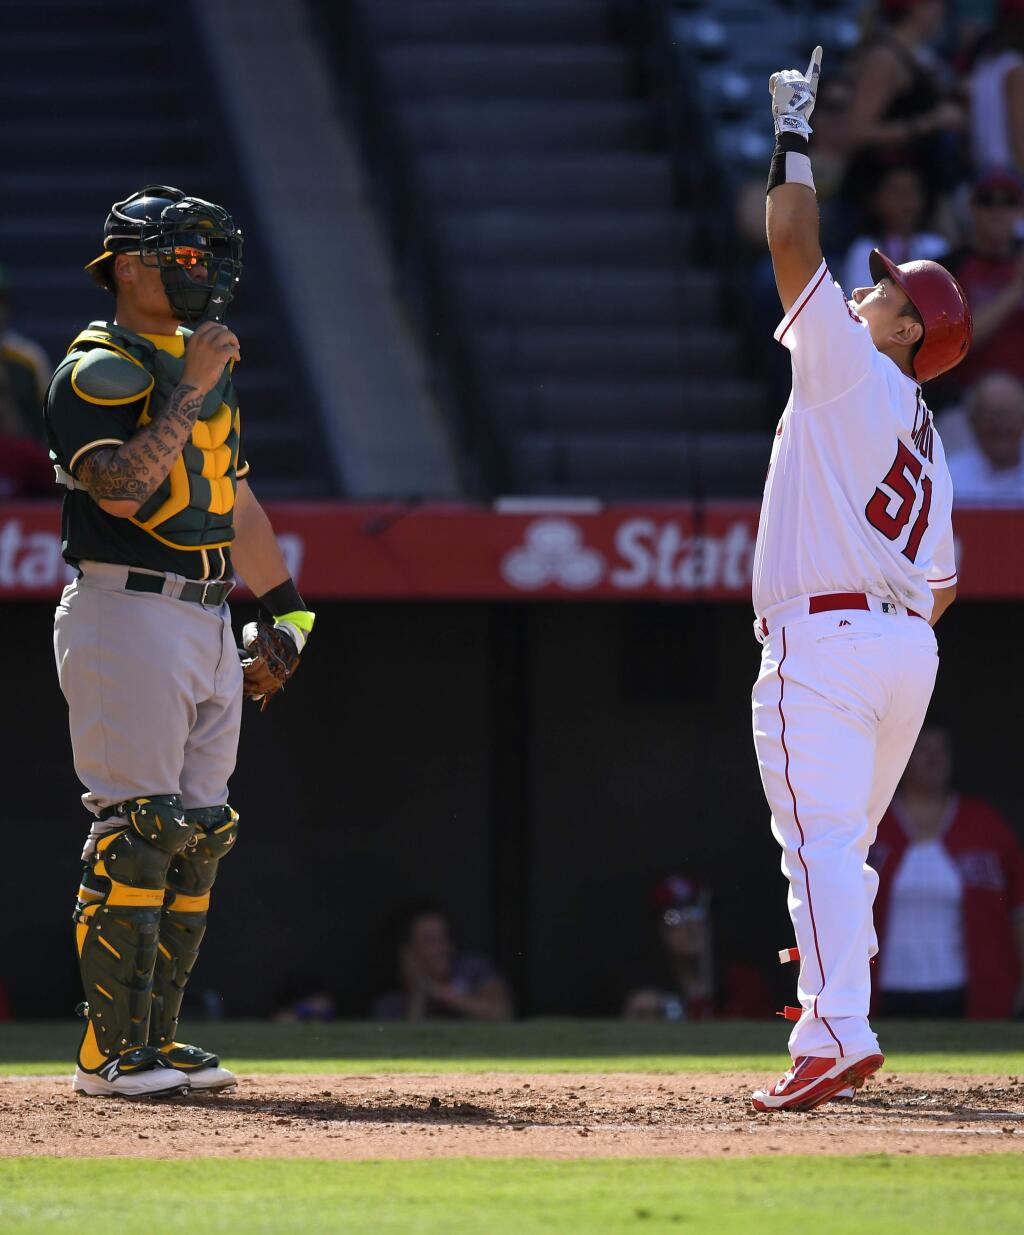 Los Angeles Angels' Ji-Man Choi, right, points to the sky after hitting a solo home run, as Oakland Athletics catcher Bruce Maxwell watches during the second inning of a baseball game Thursday, Aug. 4, 2016, in Anaheim, Calif. (AP Photo/Mark J. Terrill)